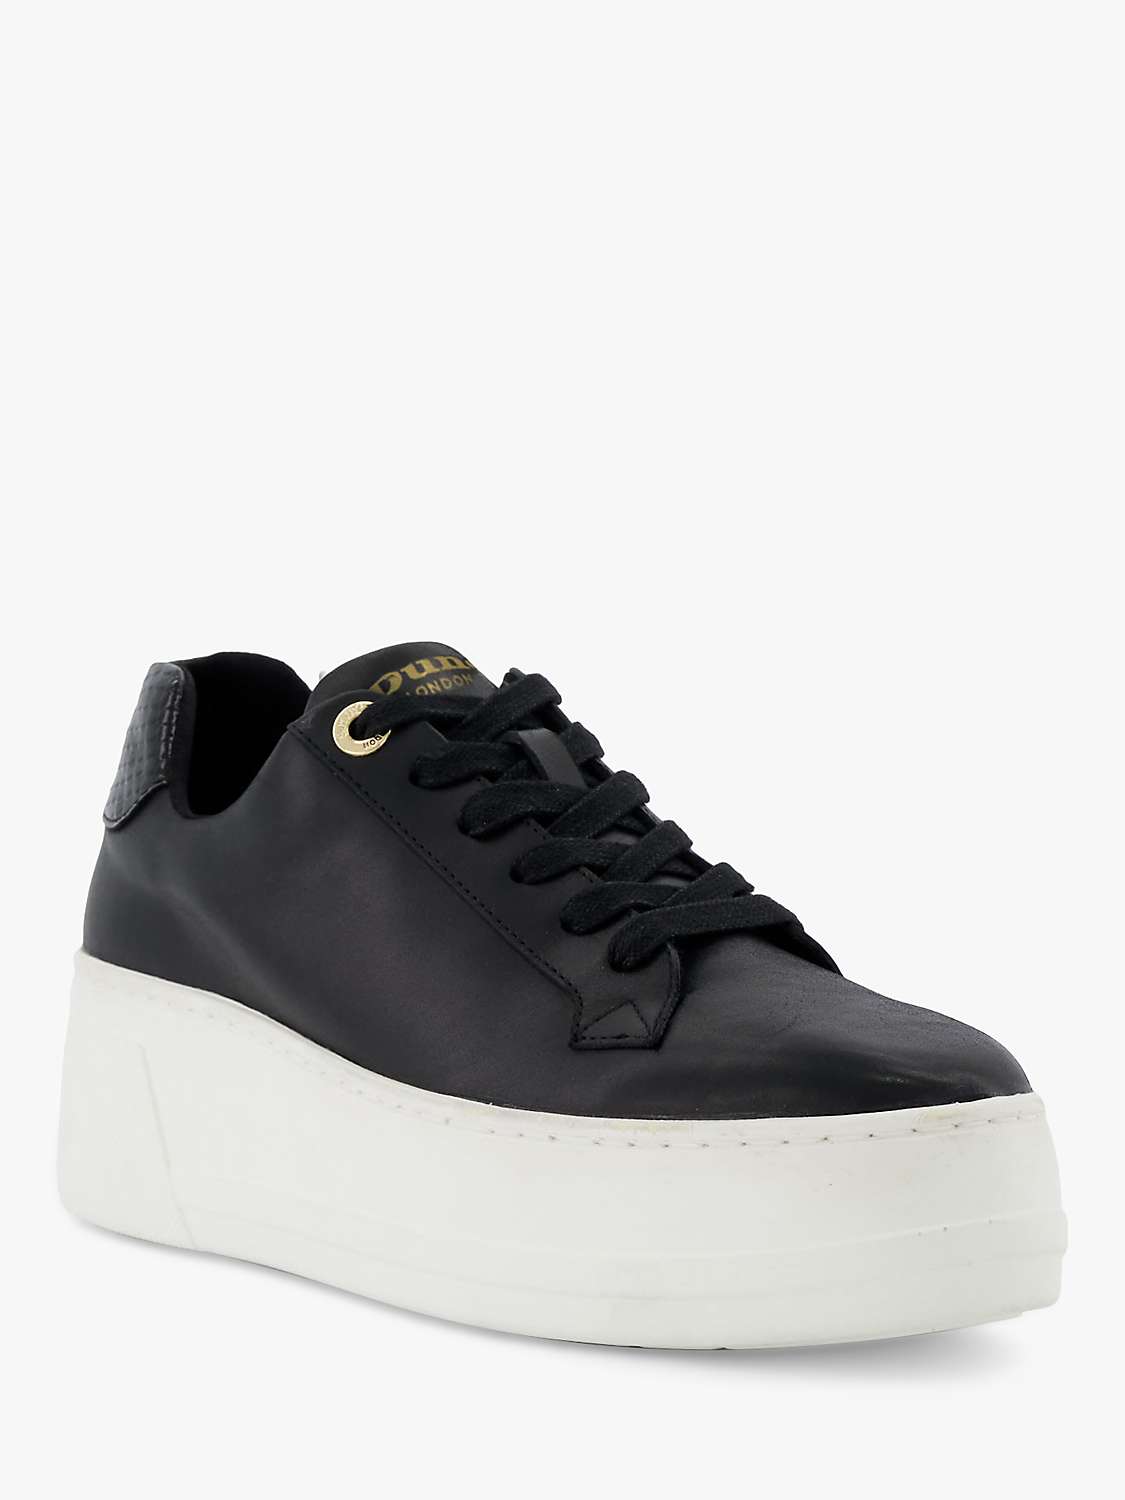 Buy Dune Episode Leather Reptile Detail Flatform Trainers Online at johnlewis.com